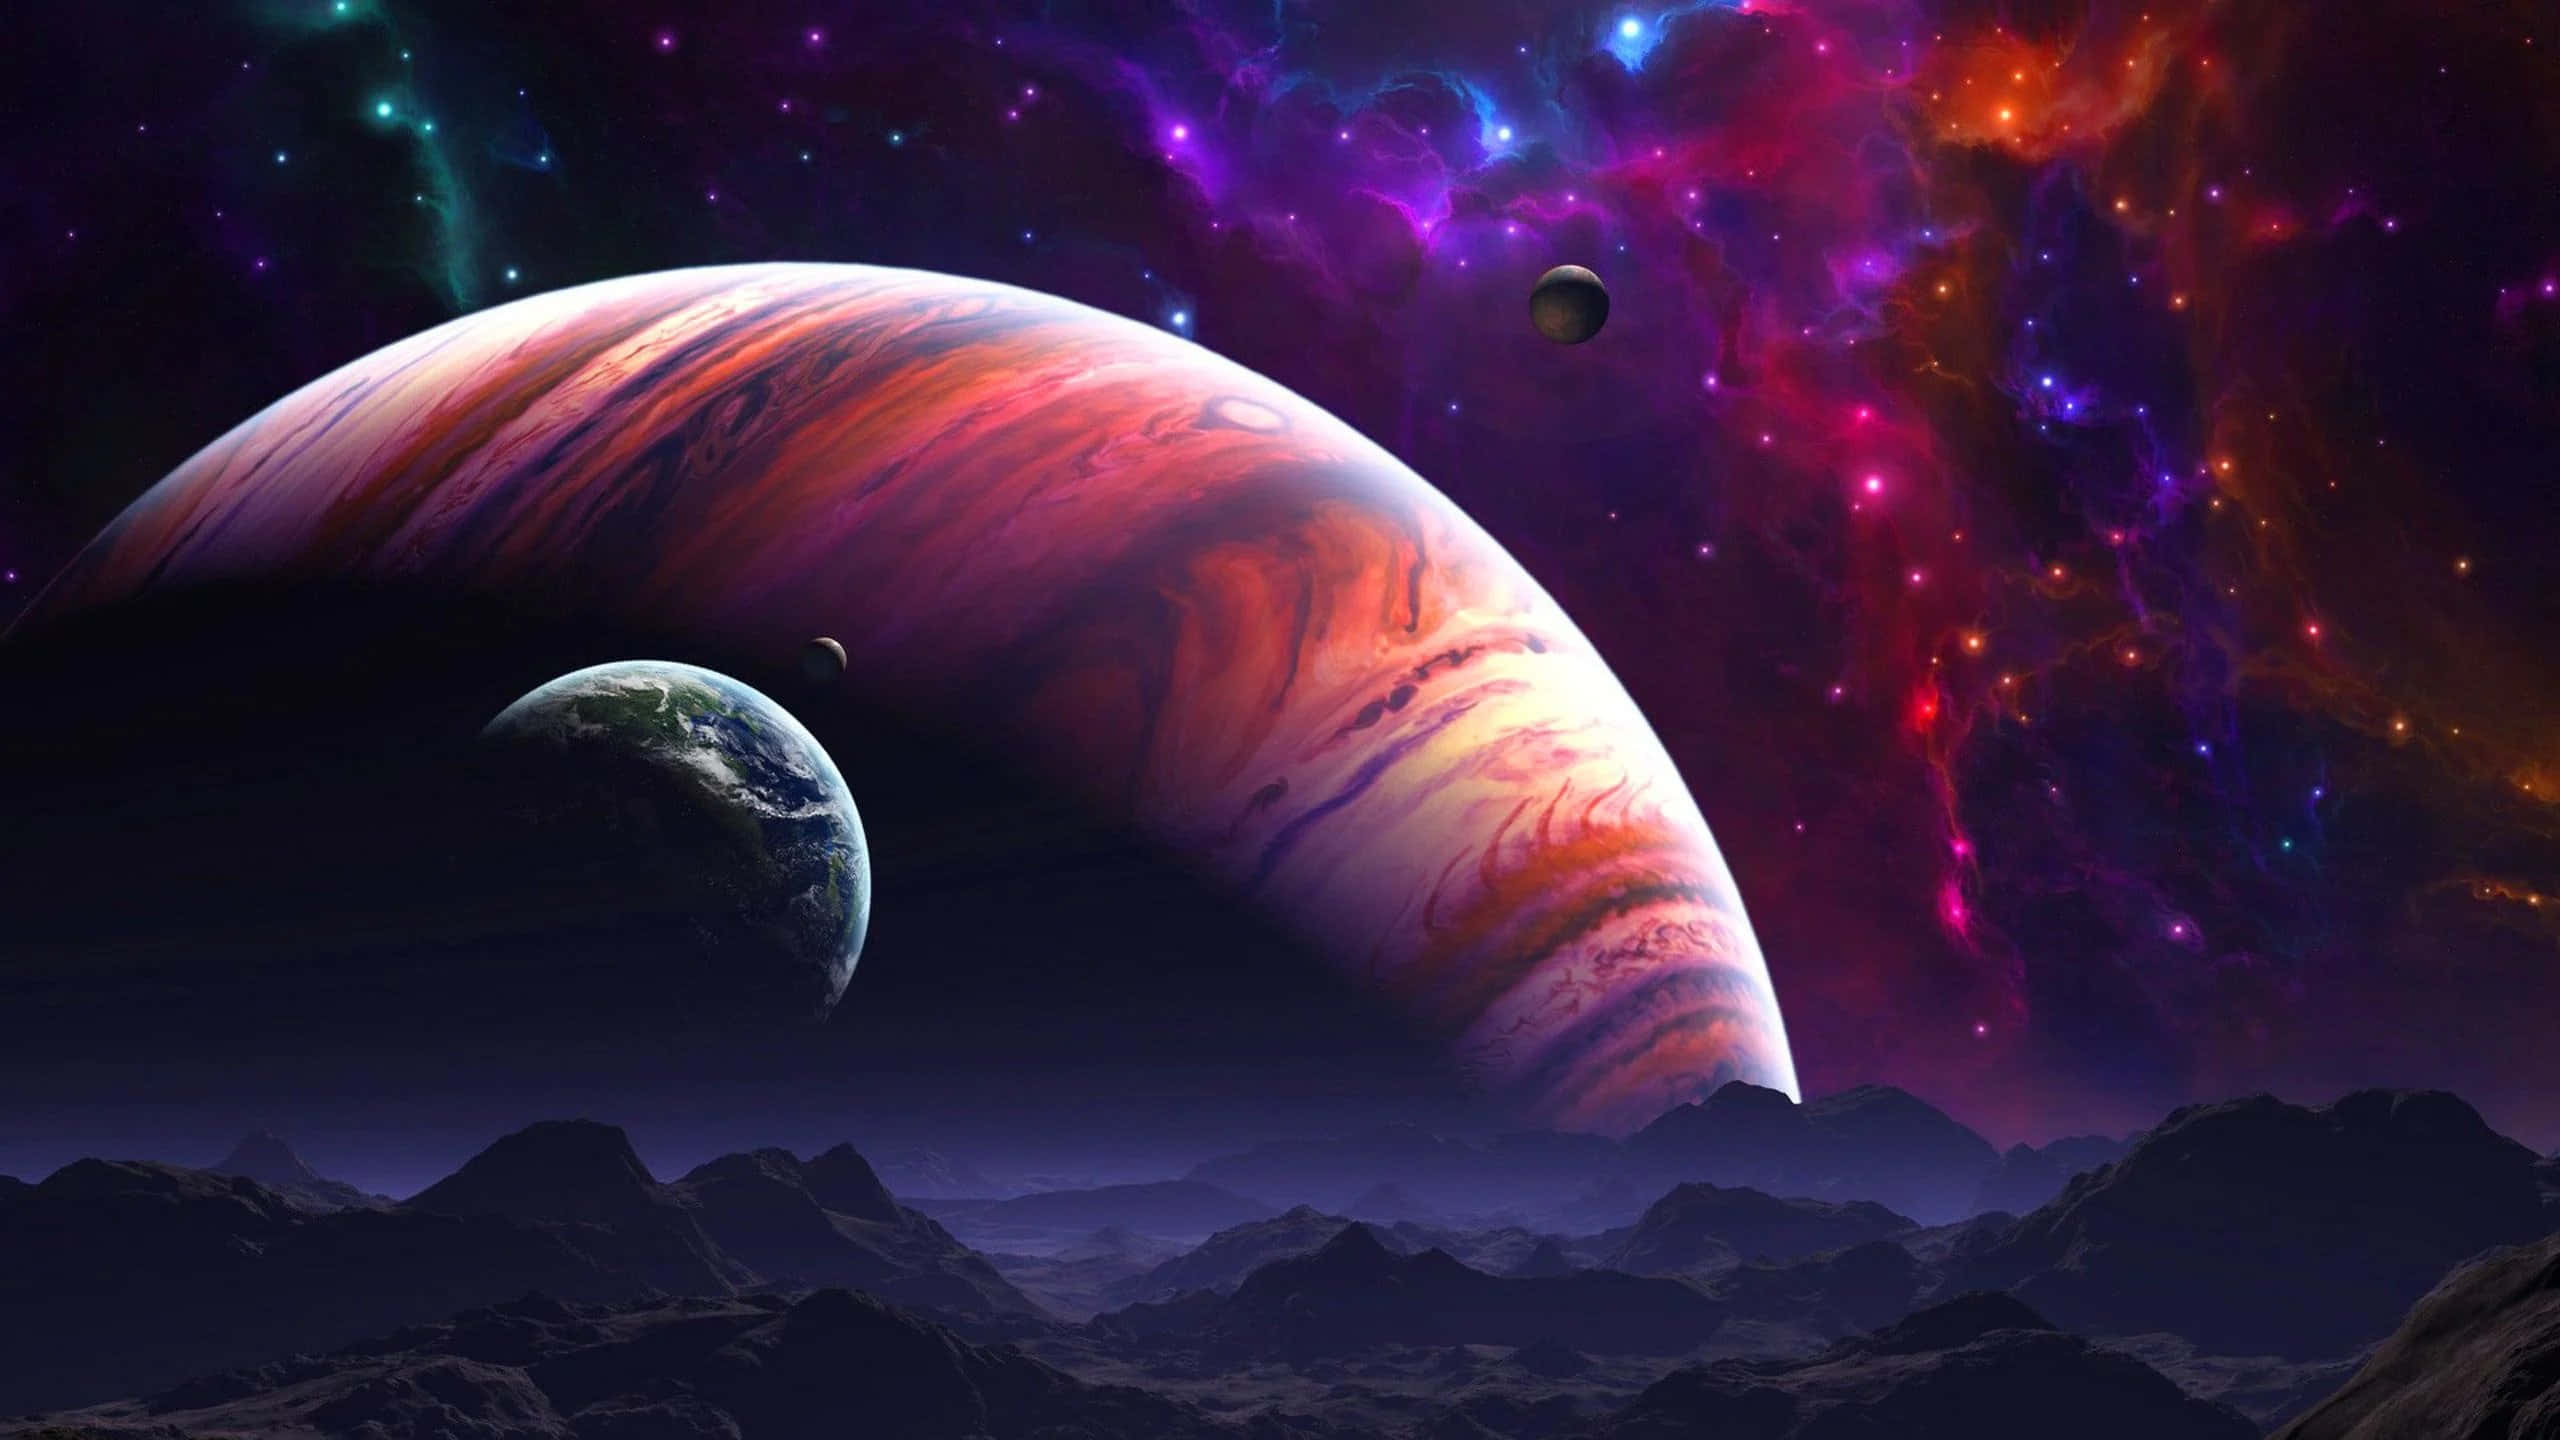 Explore the mysteries of space and marvel at the majesty of the planets&stars.